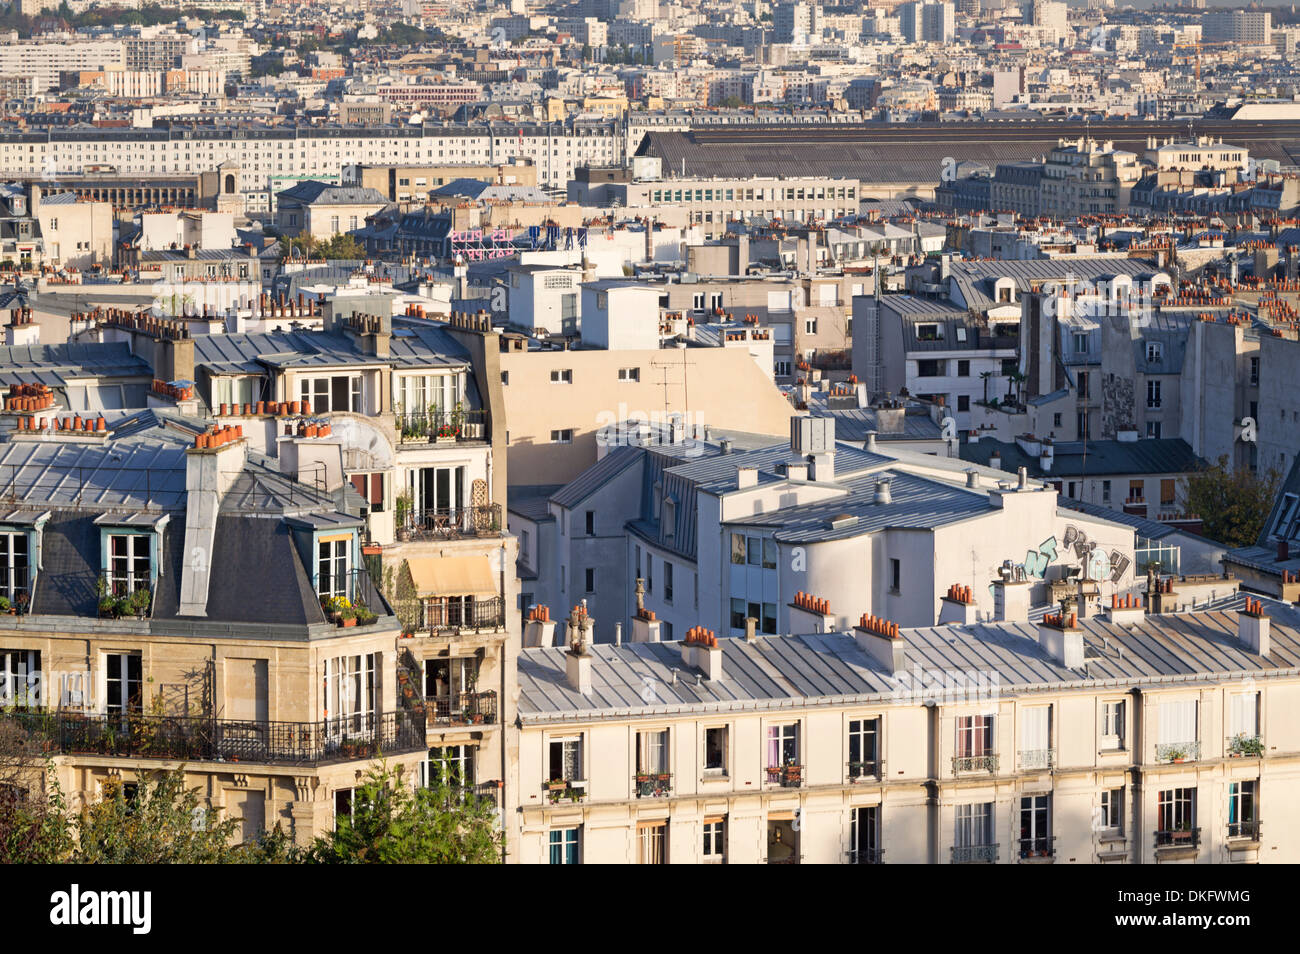 Paris, France - view across the rooftops at evening Stock Photo